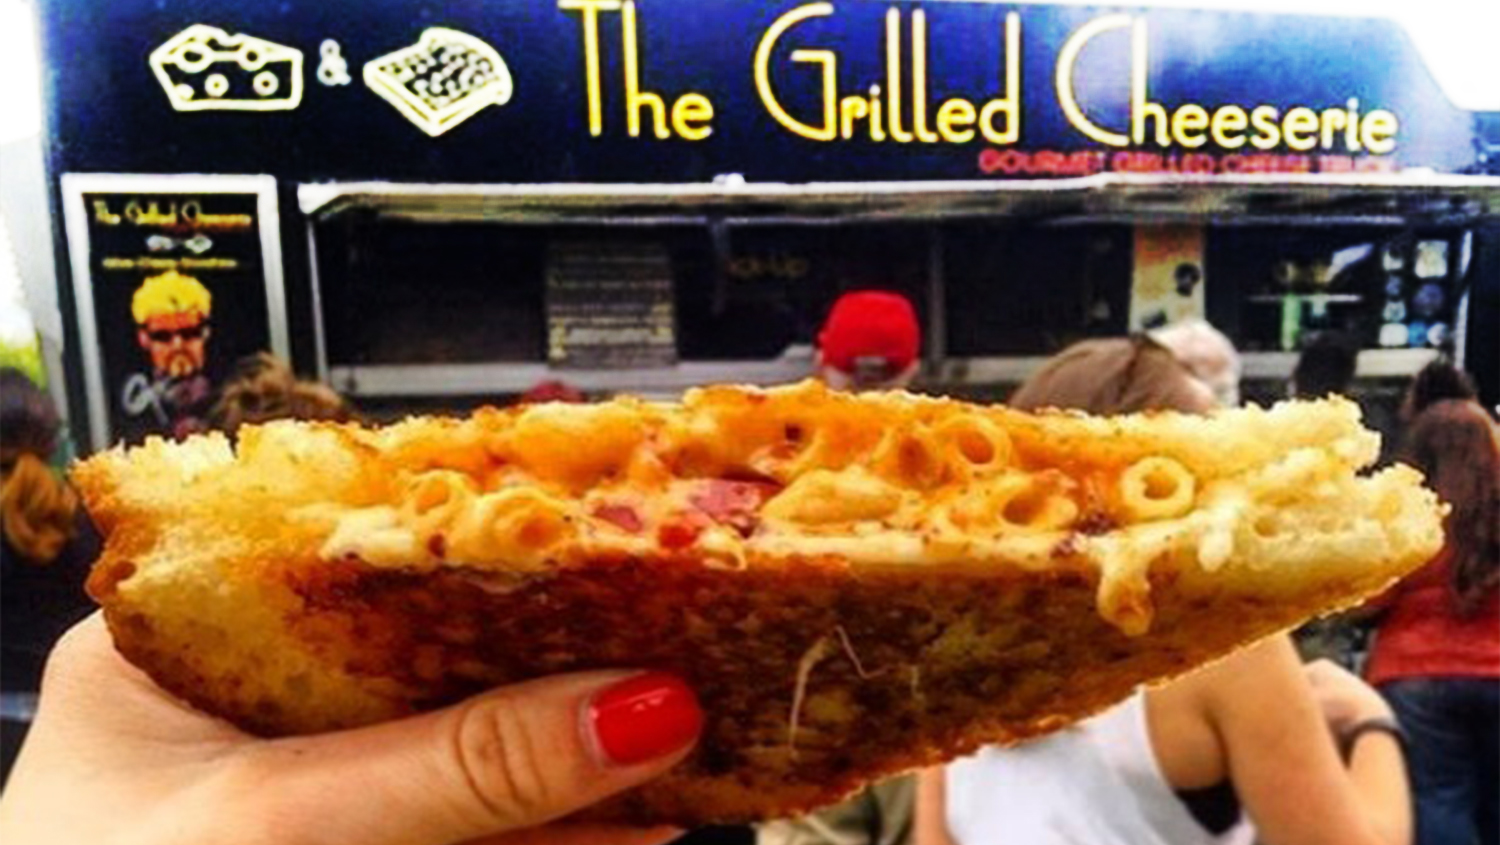 grilledcheeserie001